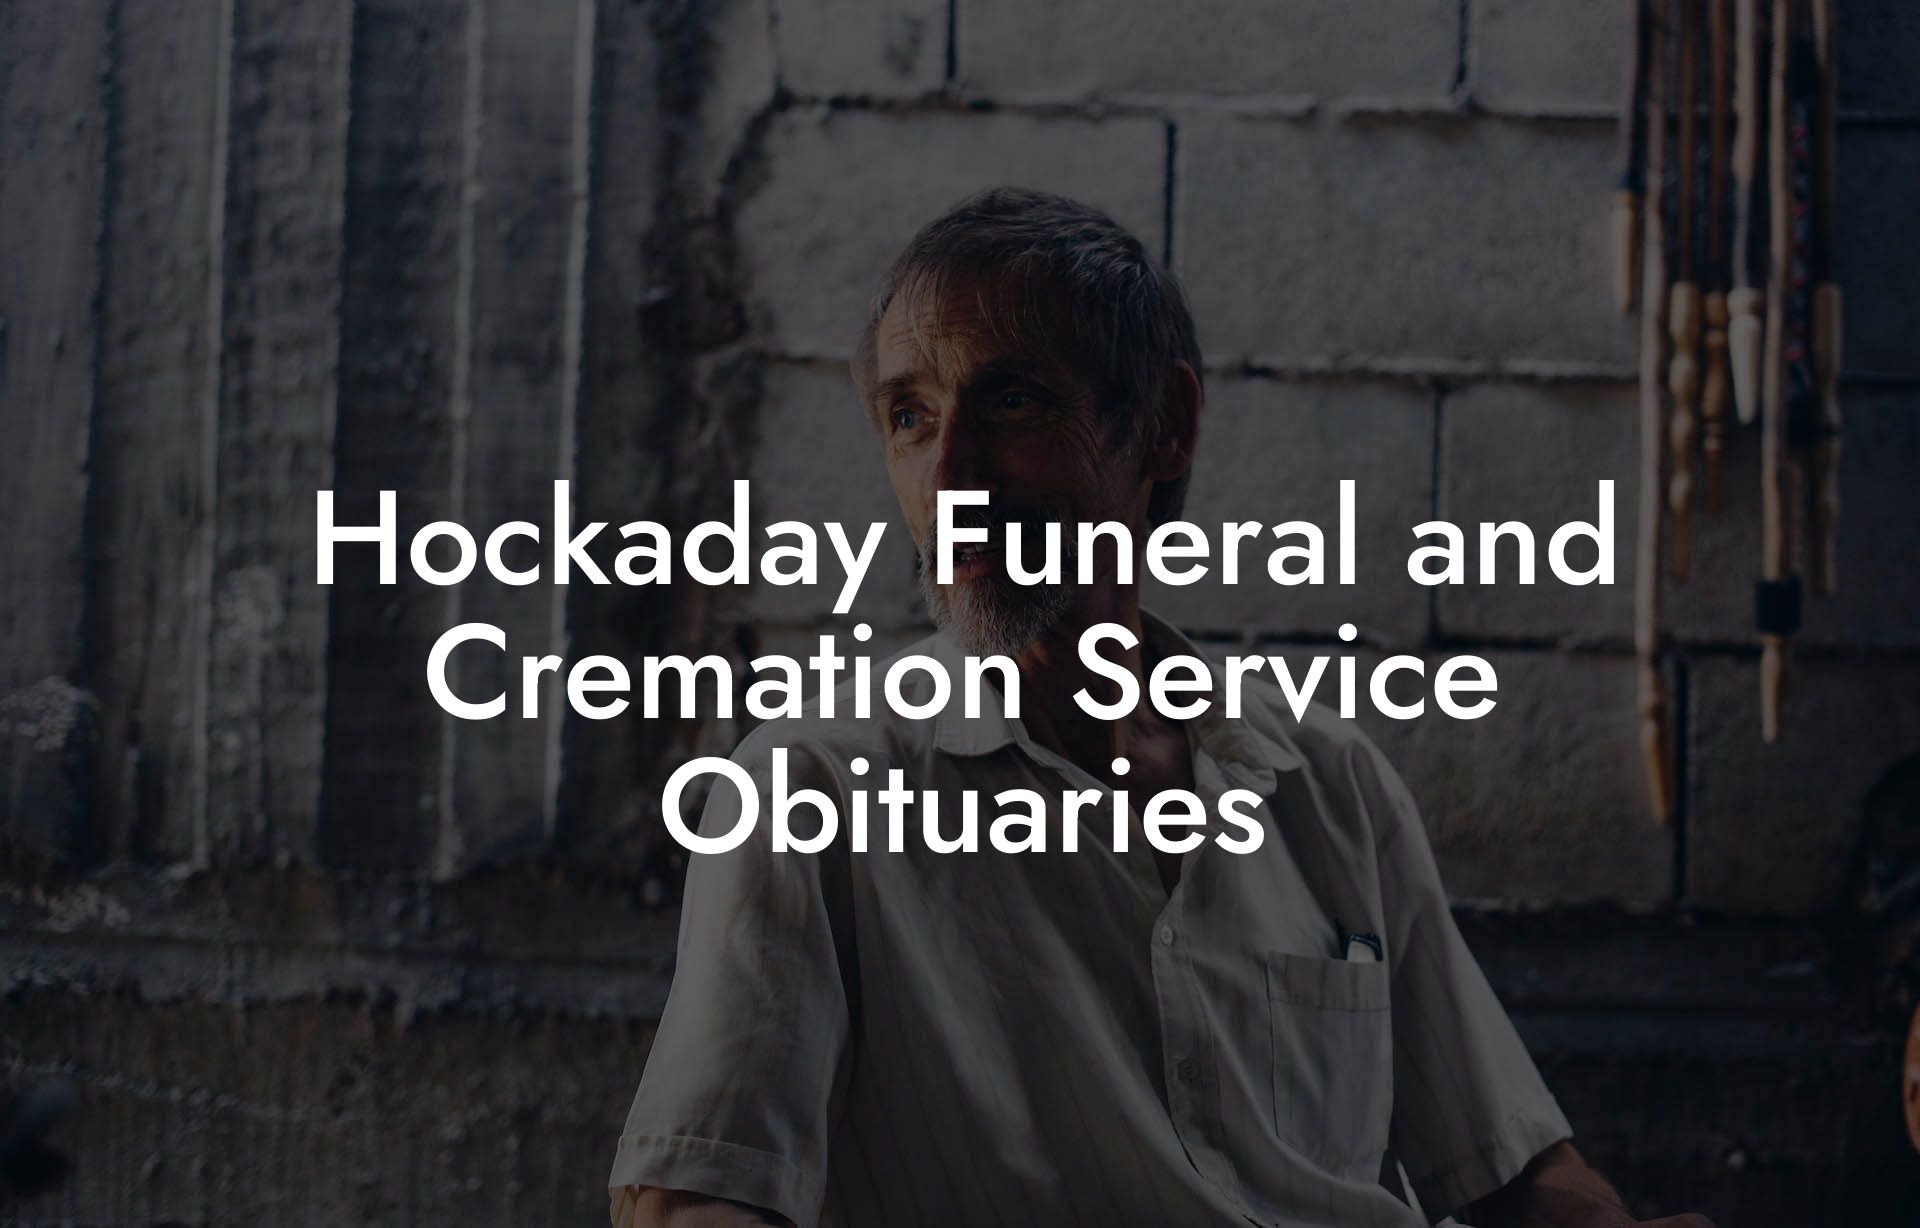 Hockaday Funeral and Cremation Service Obituaries